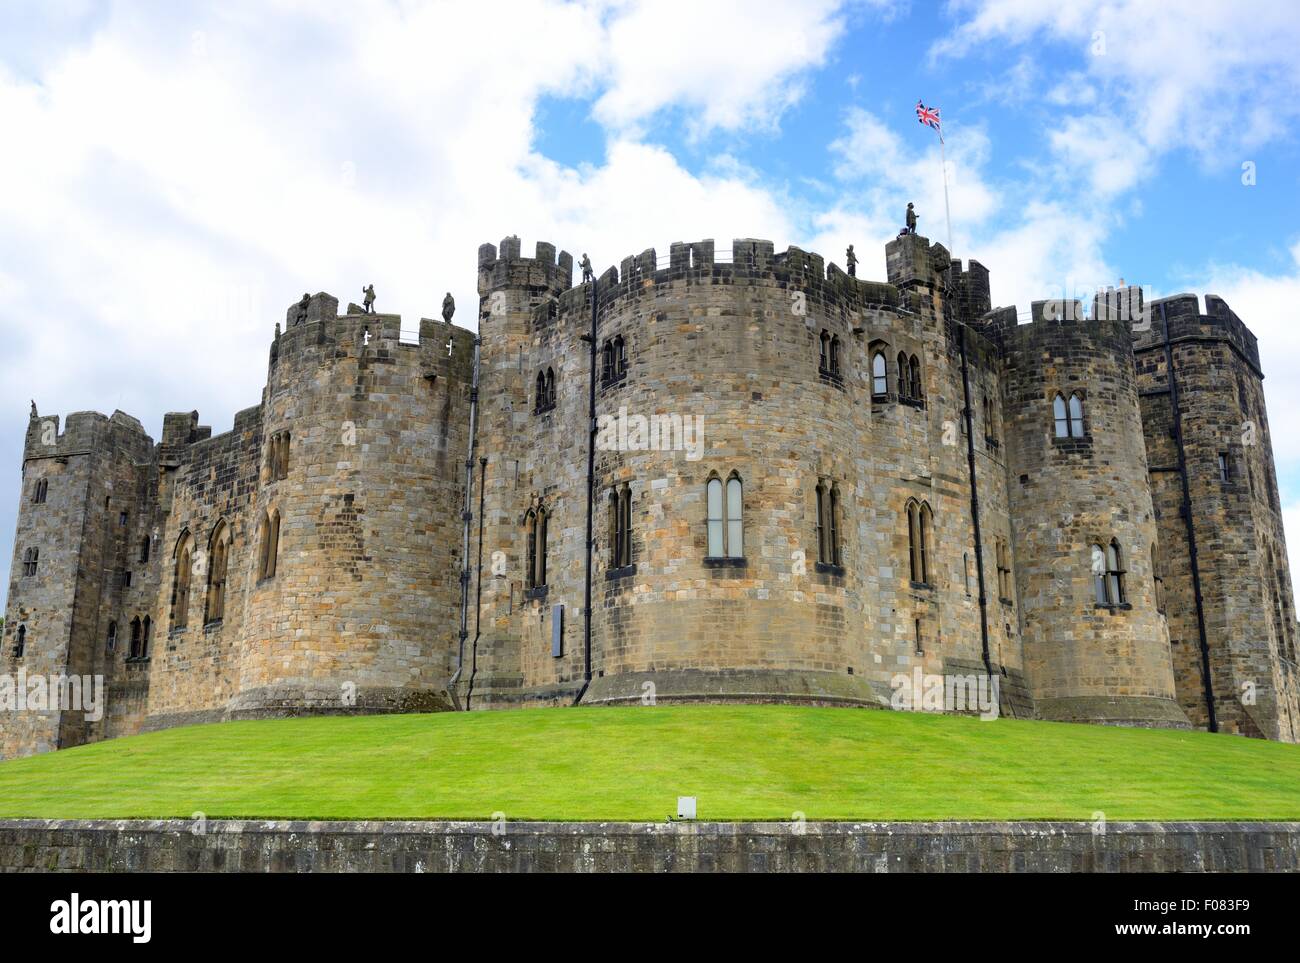 Alnwick Castle, Northumberland, England, used as a location for film and TV productions Stock Photo